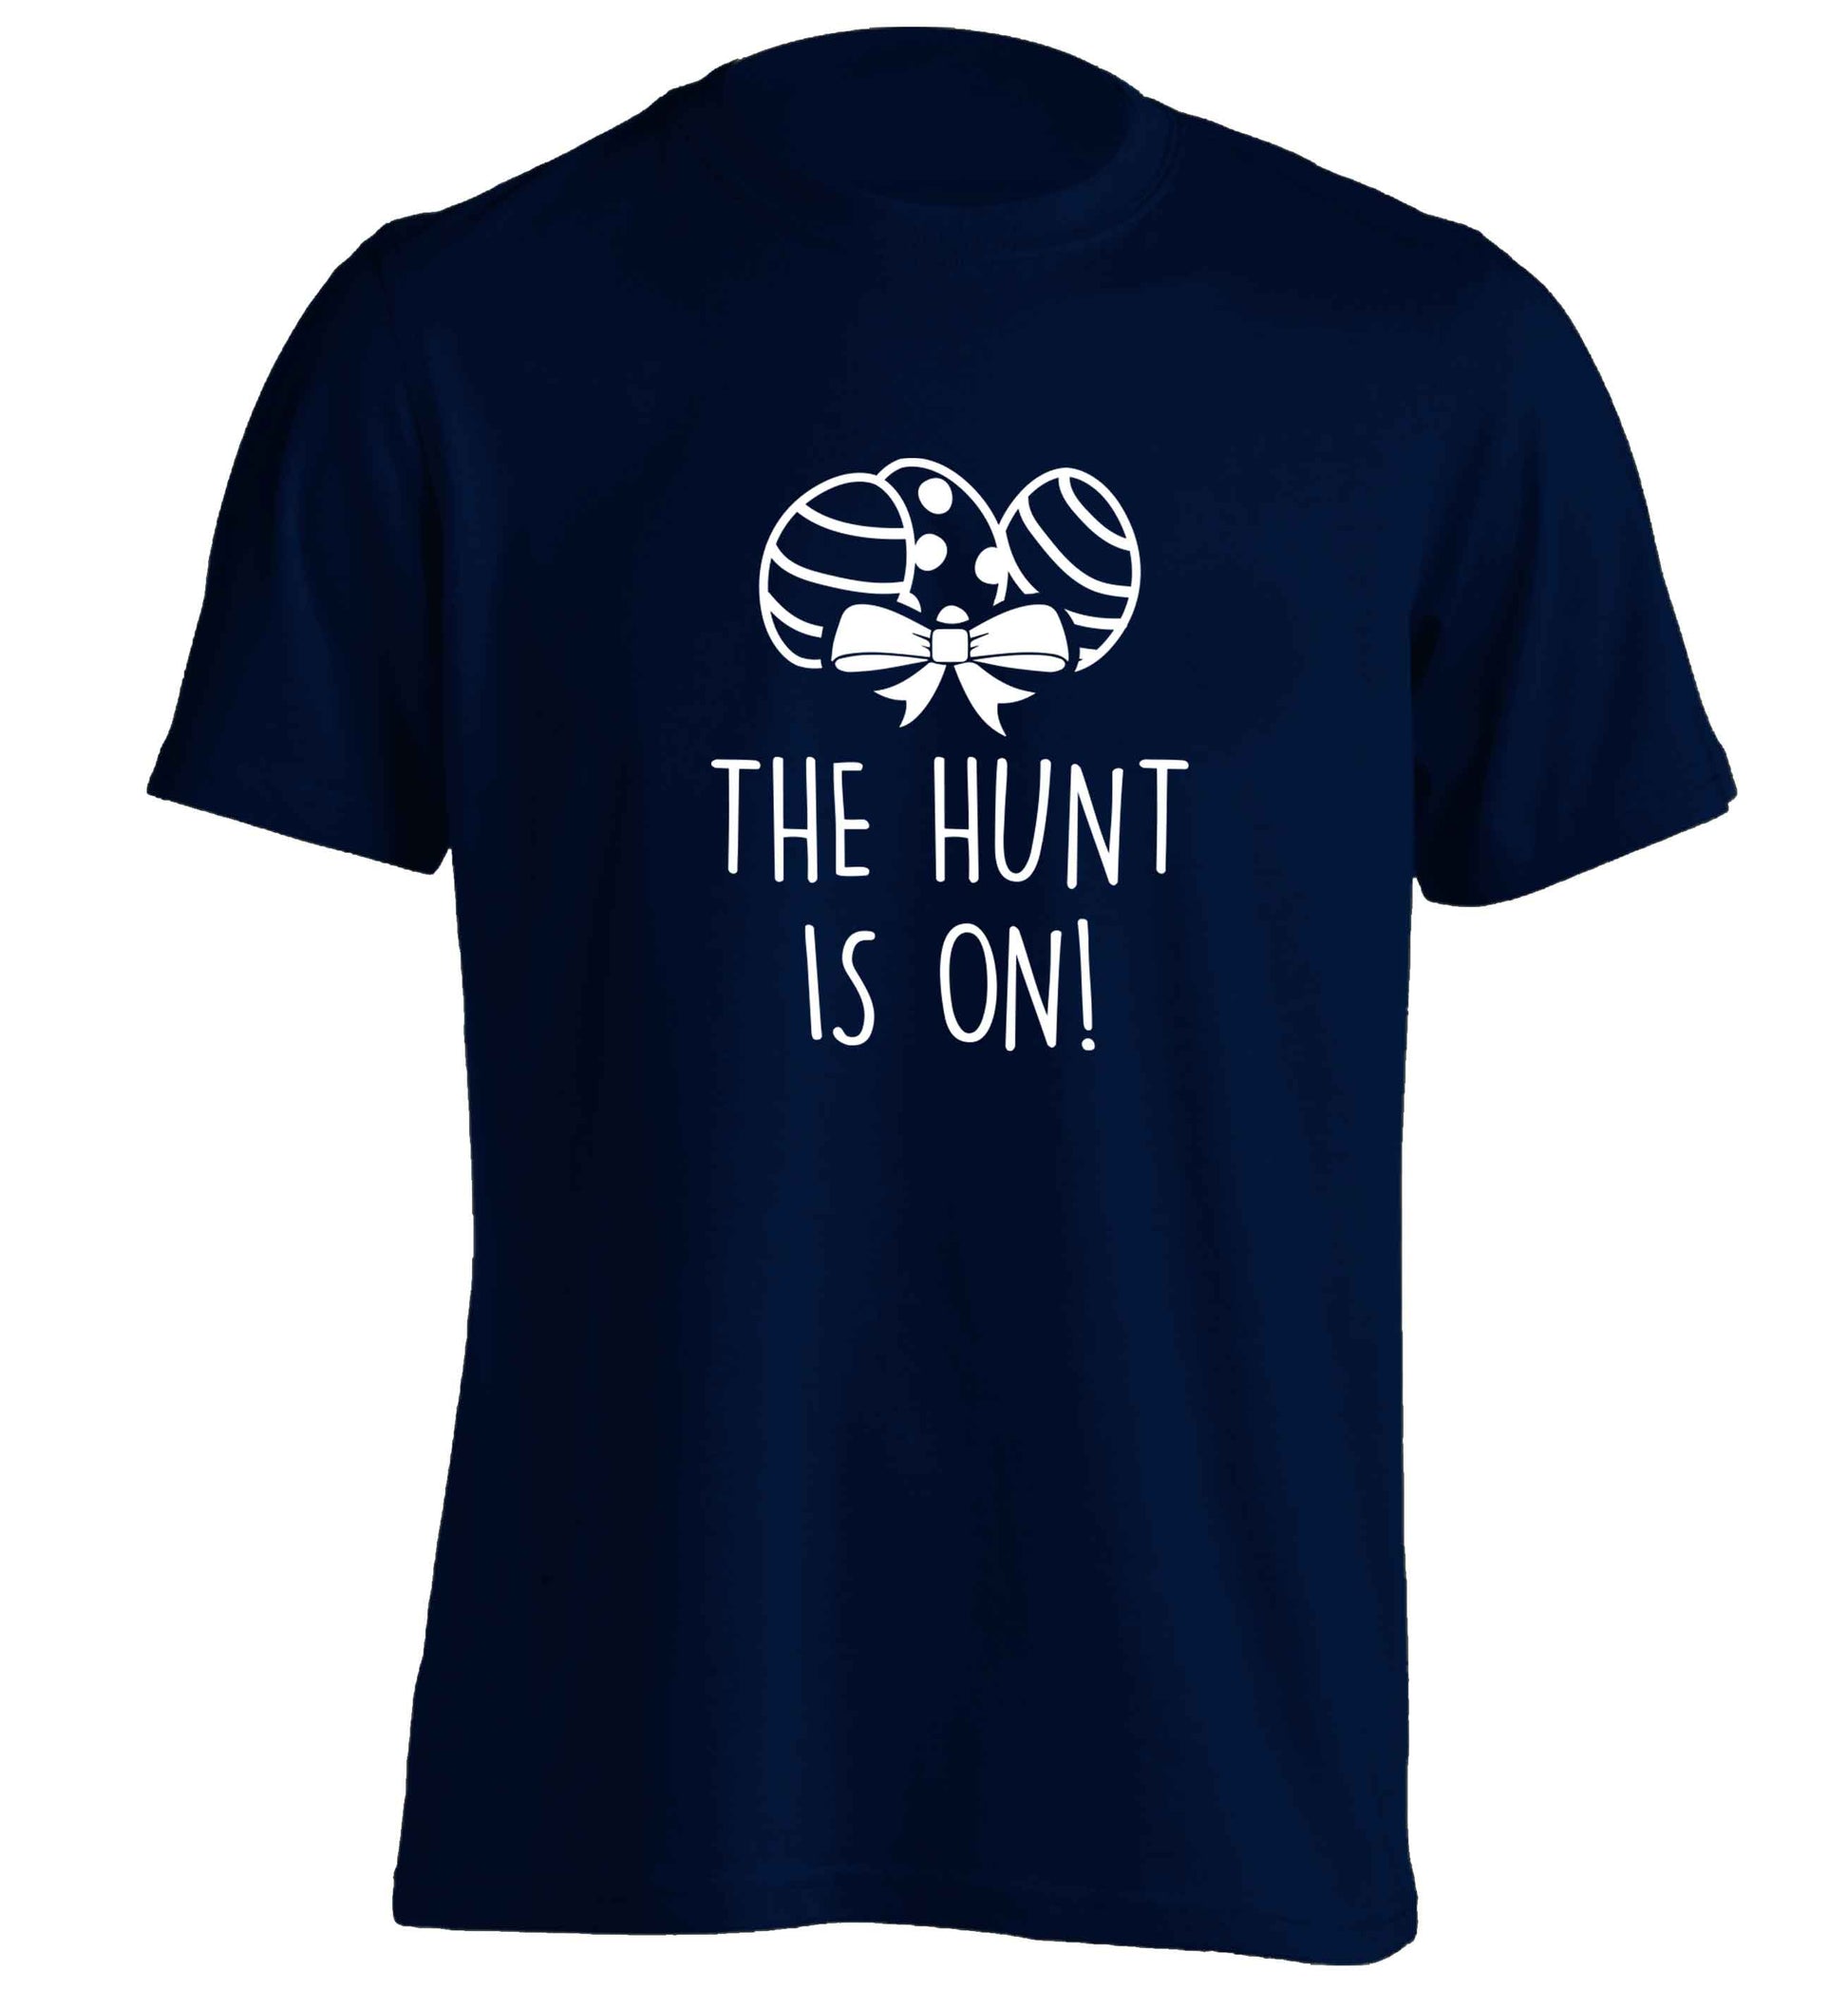 The hunt is on adults unisex navy Tshirt 2XL